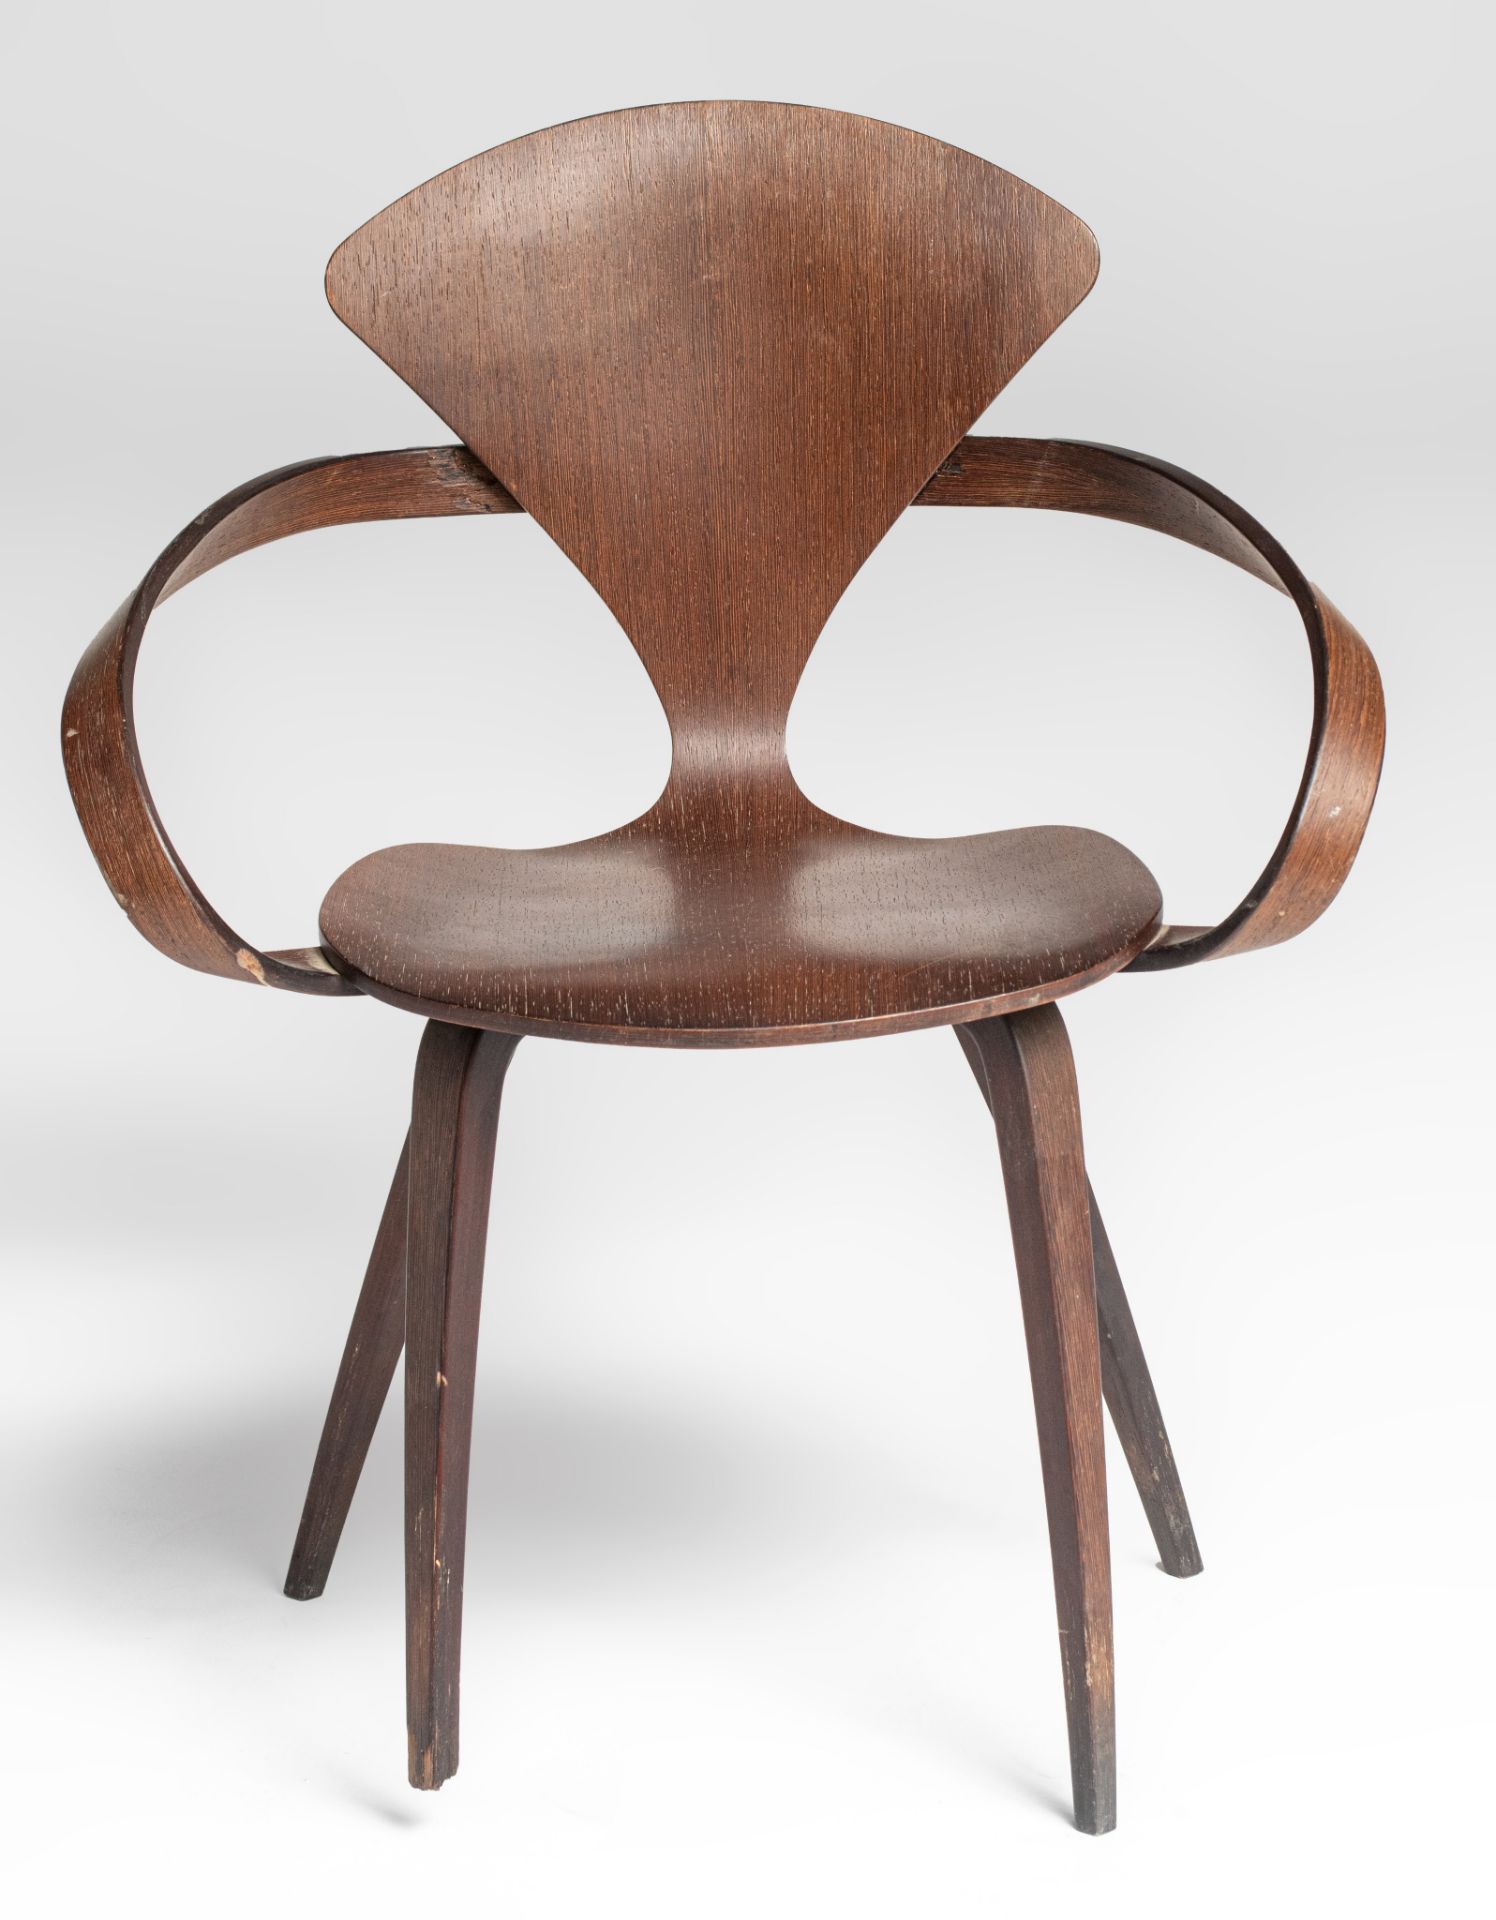 A vintage rosewood Pretzel chair by George Nelson, H 79,5 - W 67 cm - Image 4 of 13